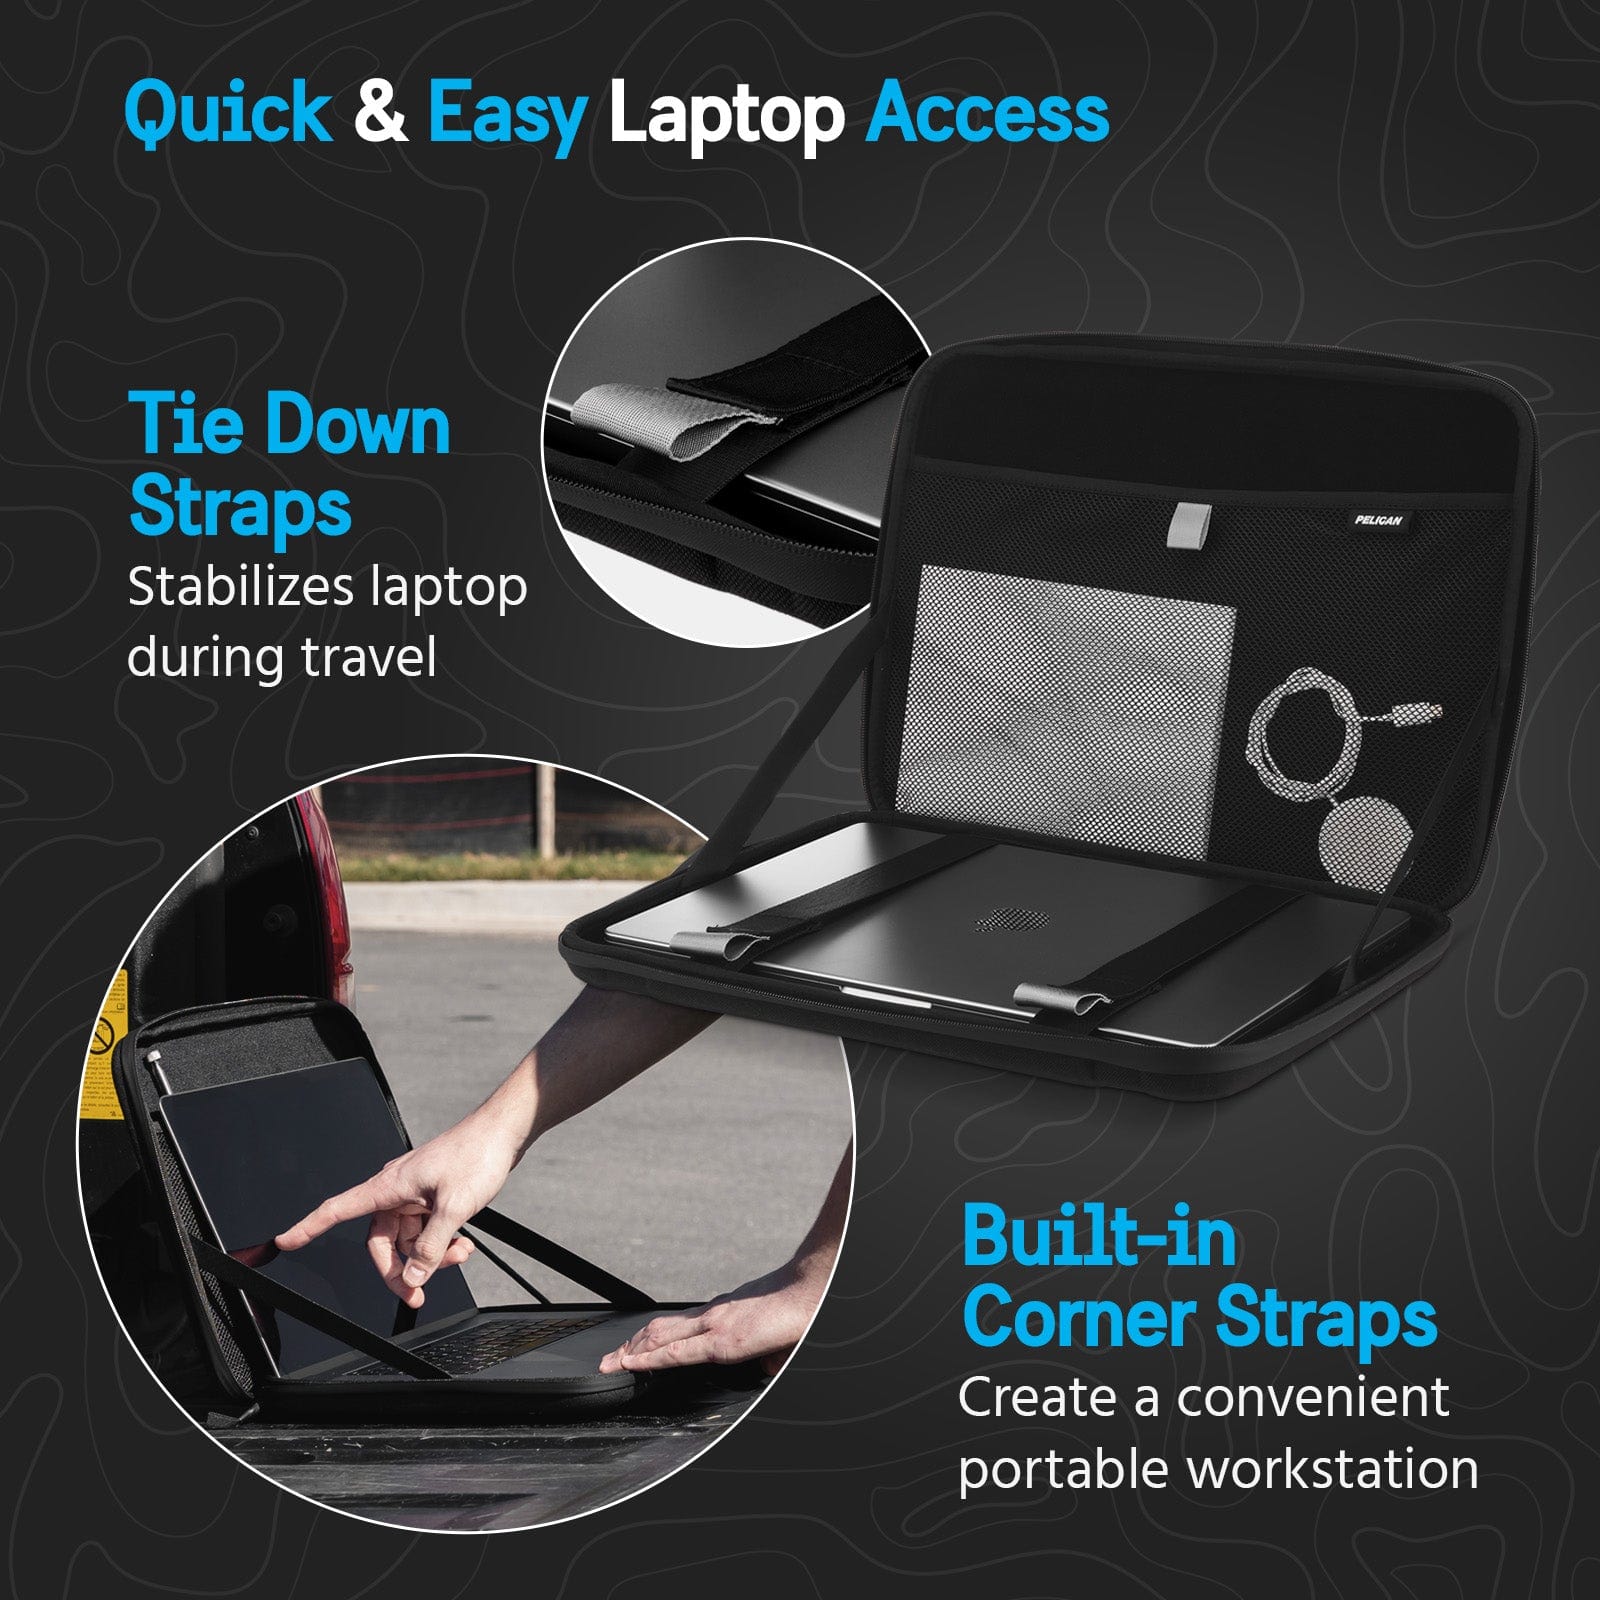 QUICK AND EASY LAPTOP ACCESS. TIE DOWN STRAPS STABILIZES LAPTOP DURING TRAVEL. BUILT-IN CORNER STRAPS CREATE A CONVENIENT PORTABLE WORKSTATION.